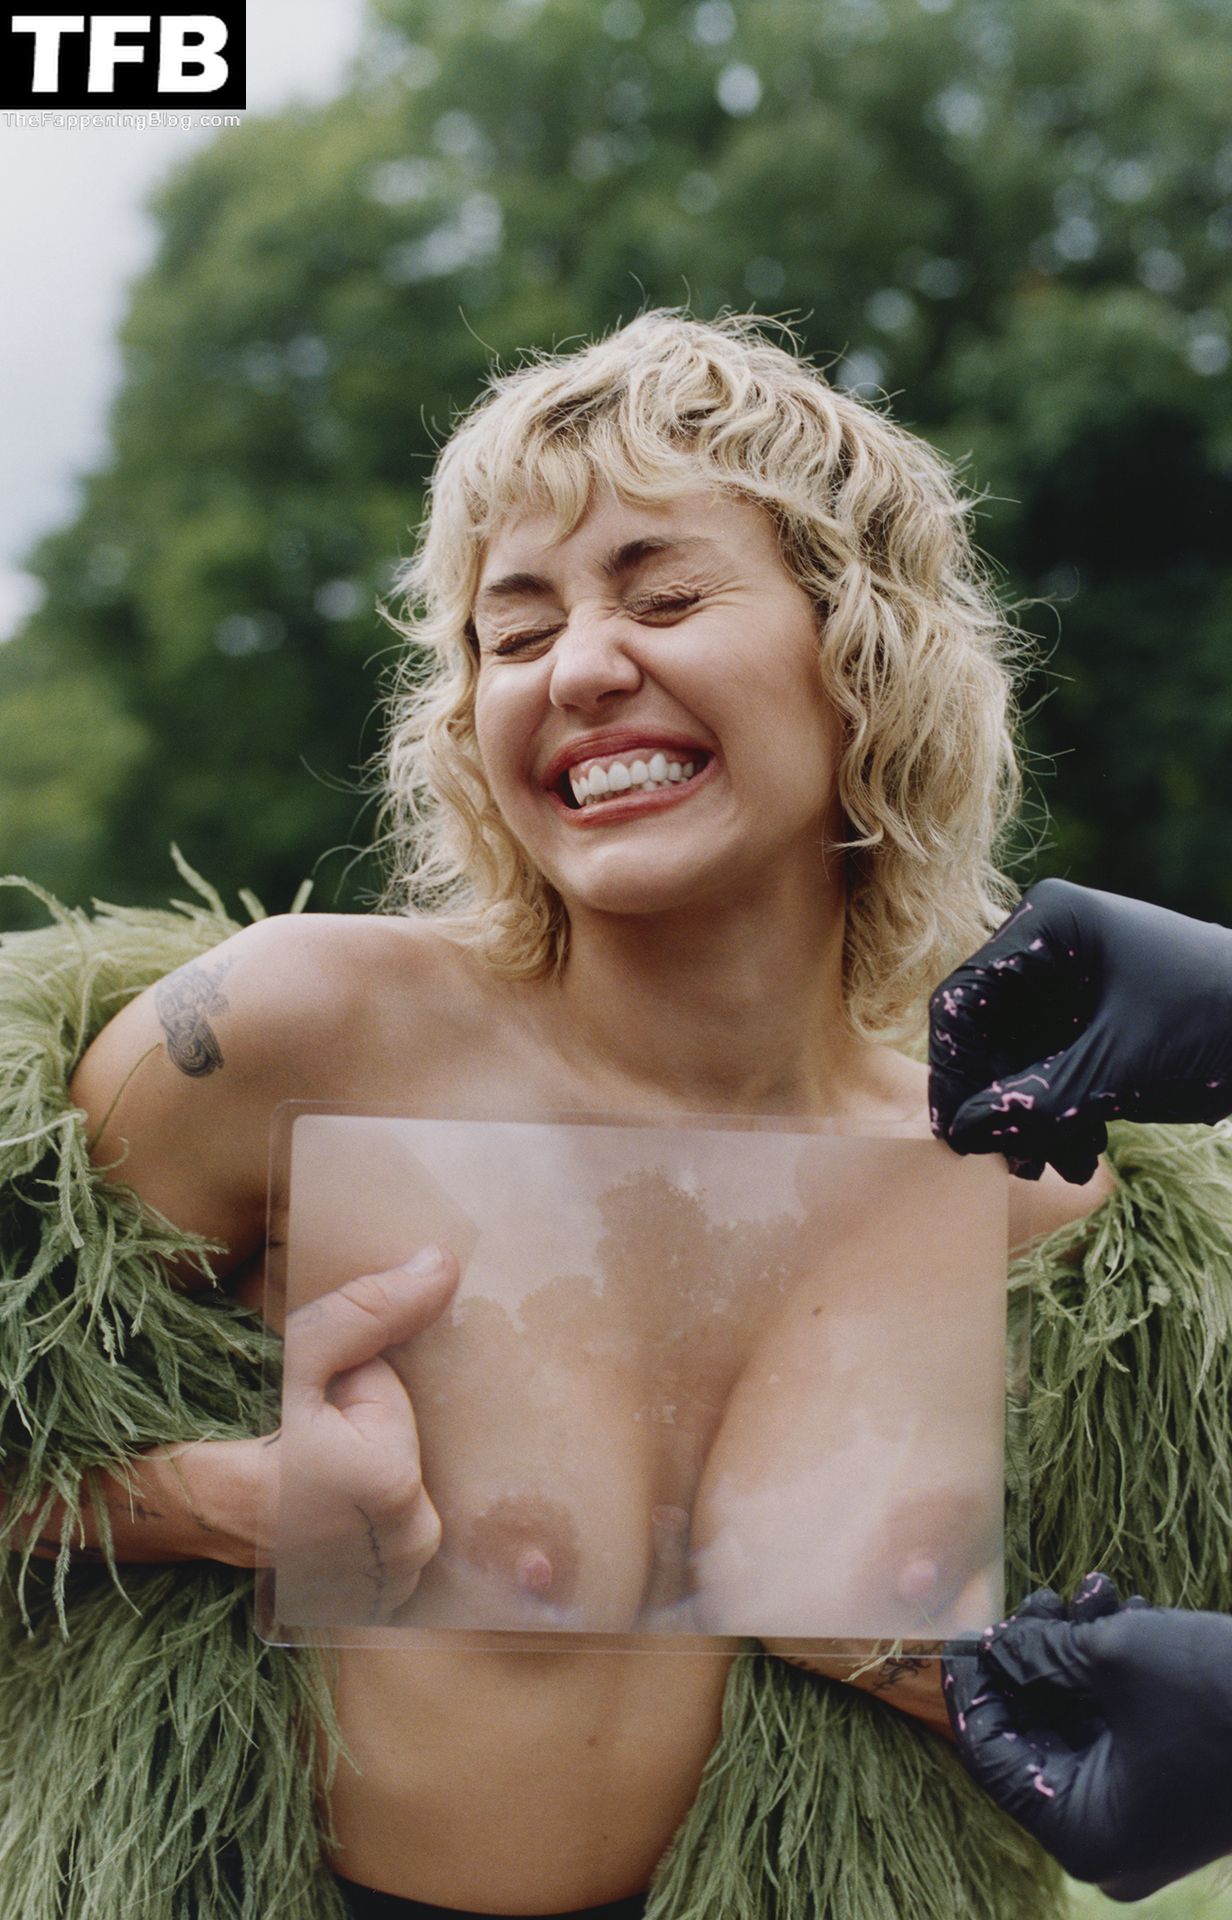 Fappening miley 2.0 cyrus Here We